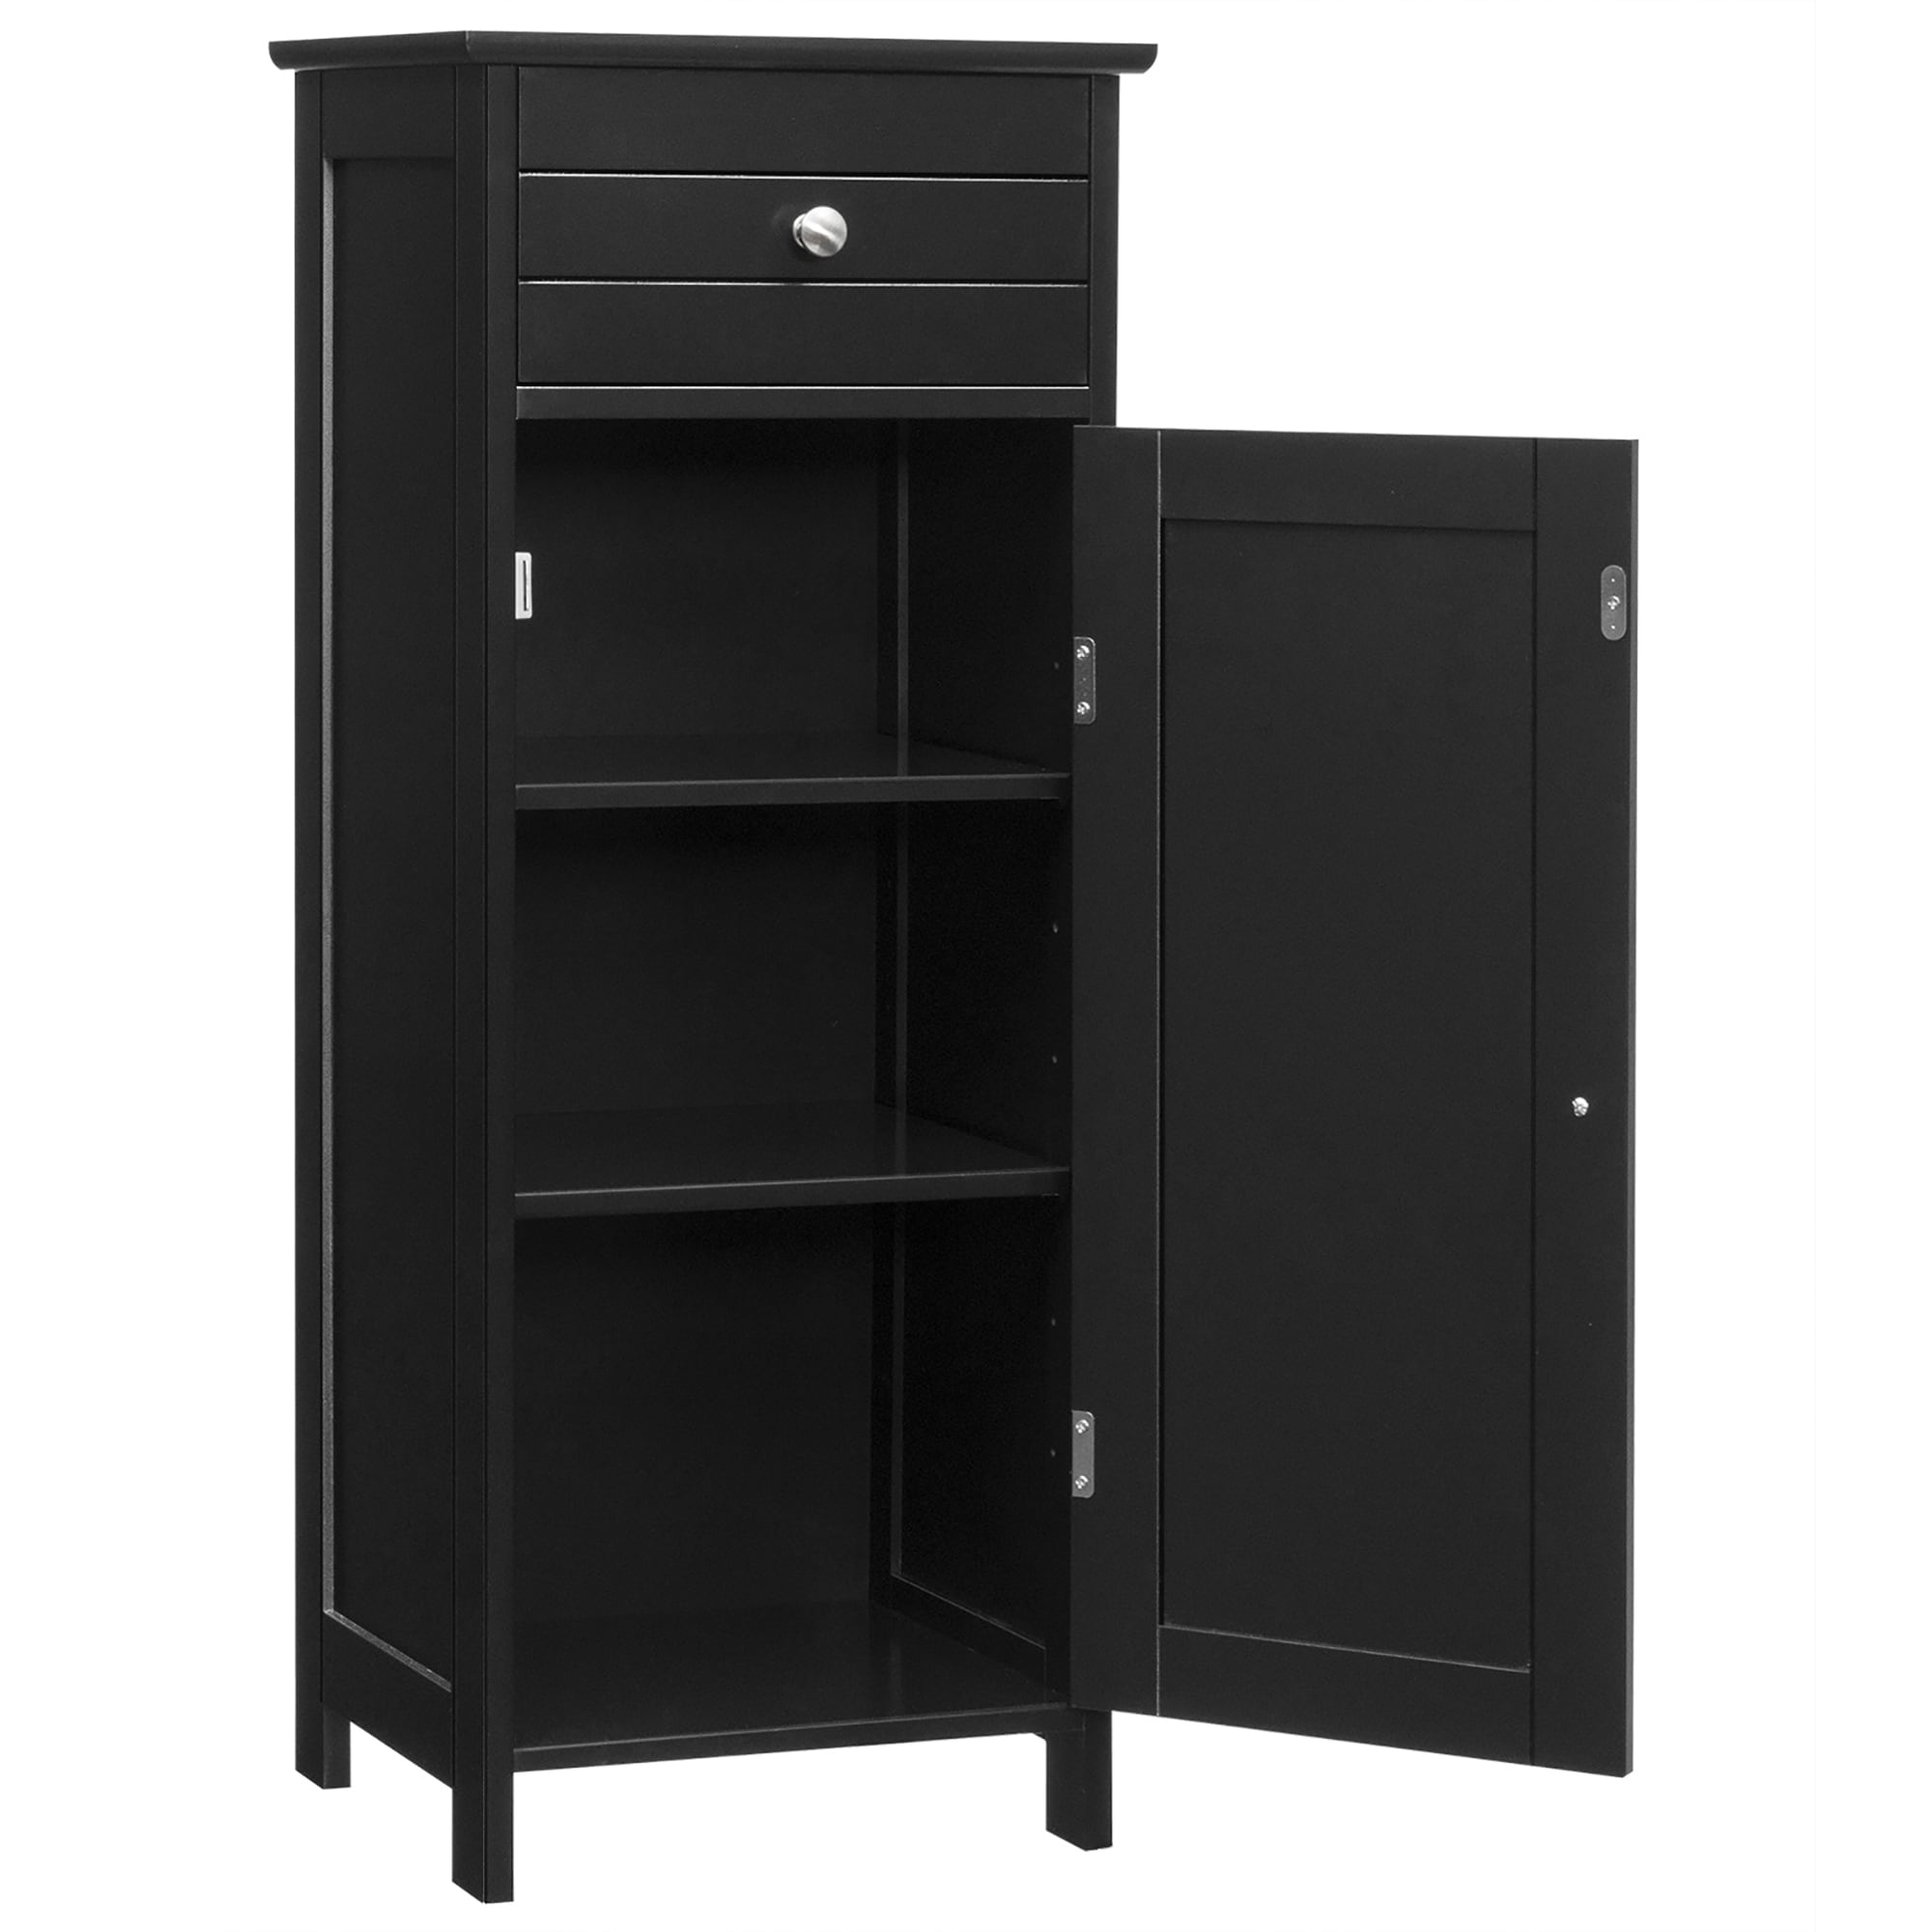 https://ak1.ostkcdn.com/images/products/is/images/direct/a44352739b0ff5729cd2fd2ad9774646a50dc35f/Costway-Bathroom-Floor-Cabinet-Storage-Organizer-Free-Standing-w-.jpg